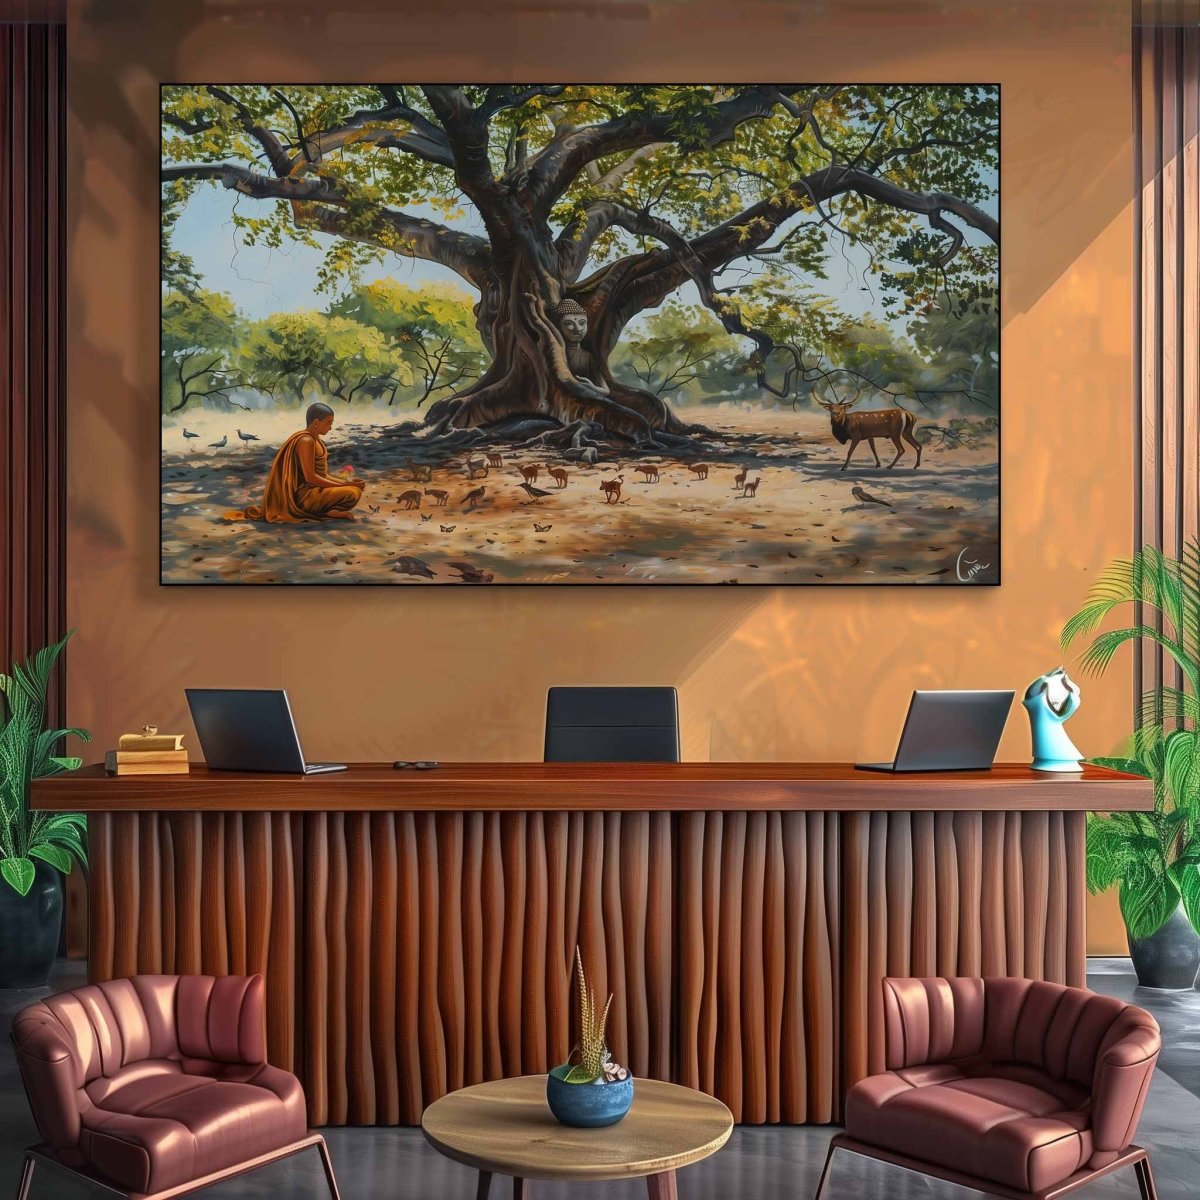 The Buddha Within: A Monk's Encounter Canvas Wall Art (36 x 24 Inches)